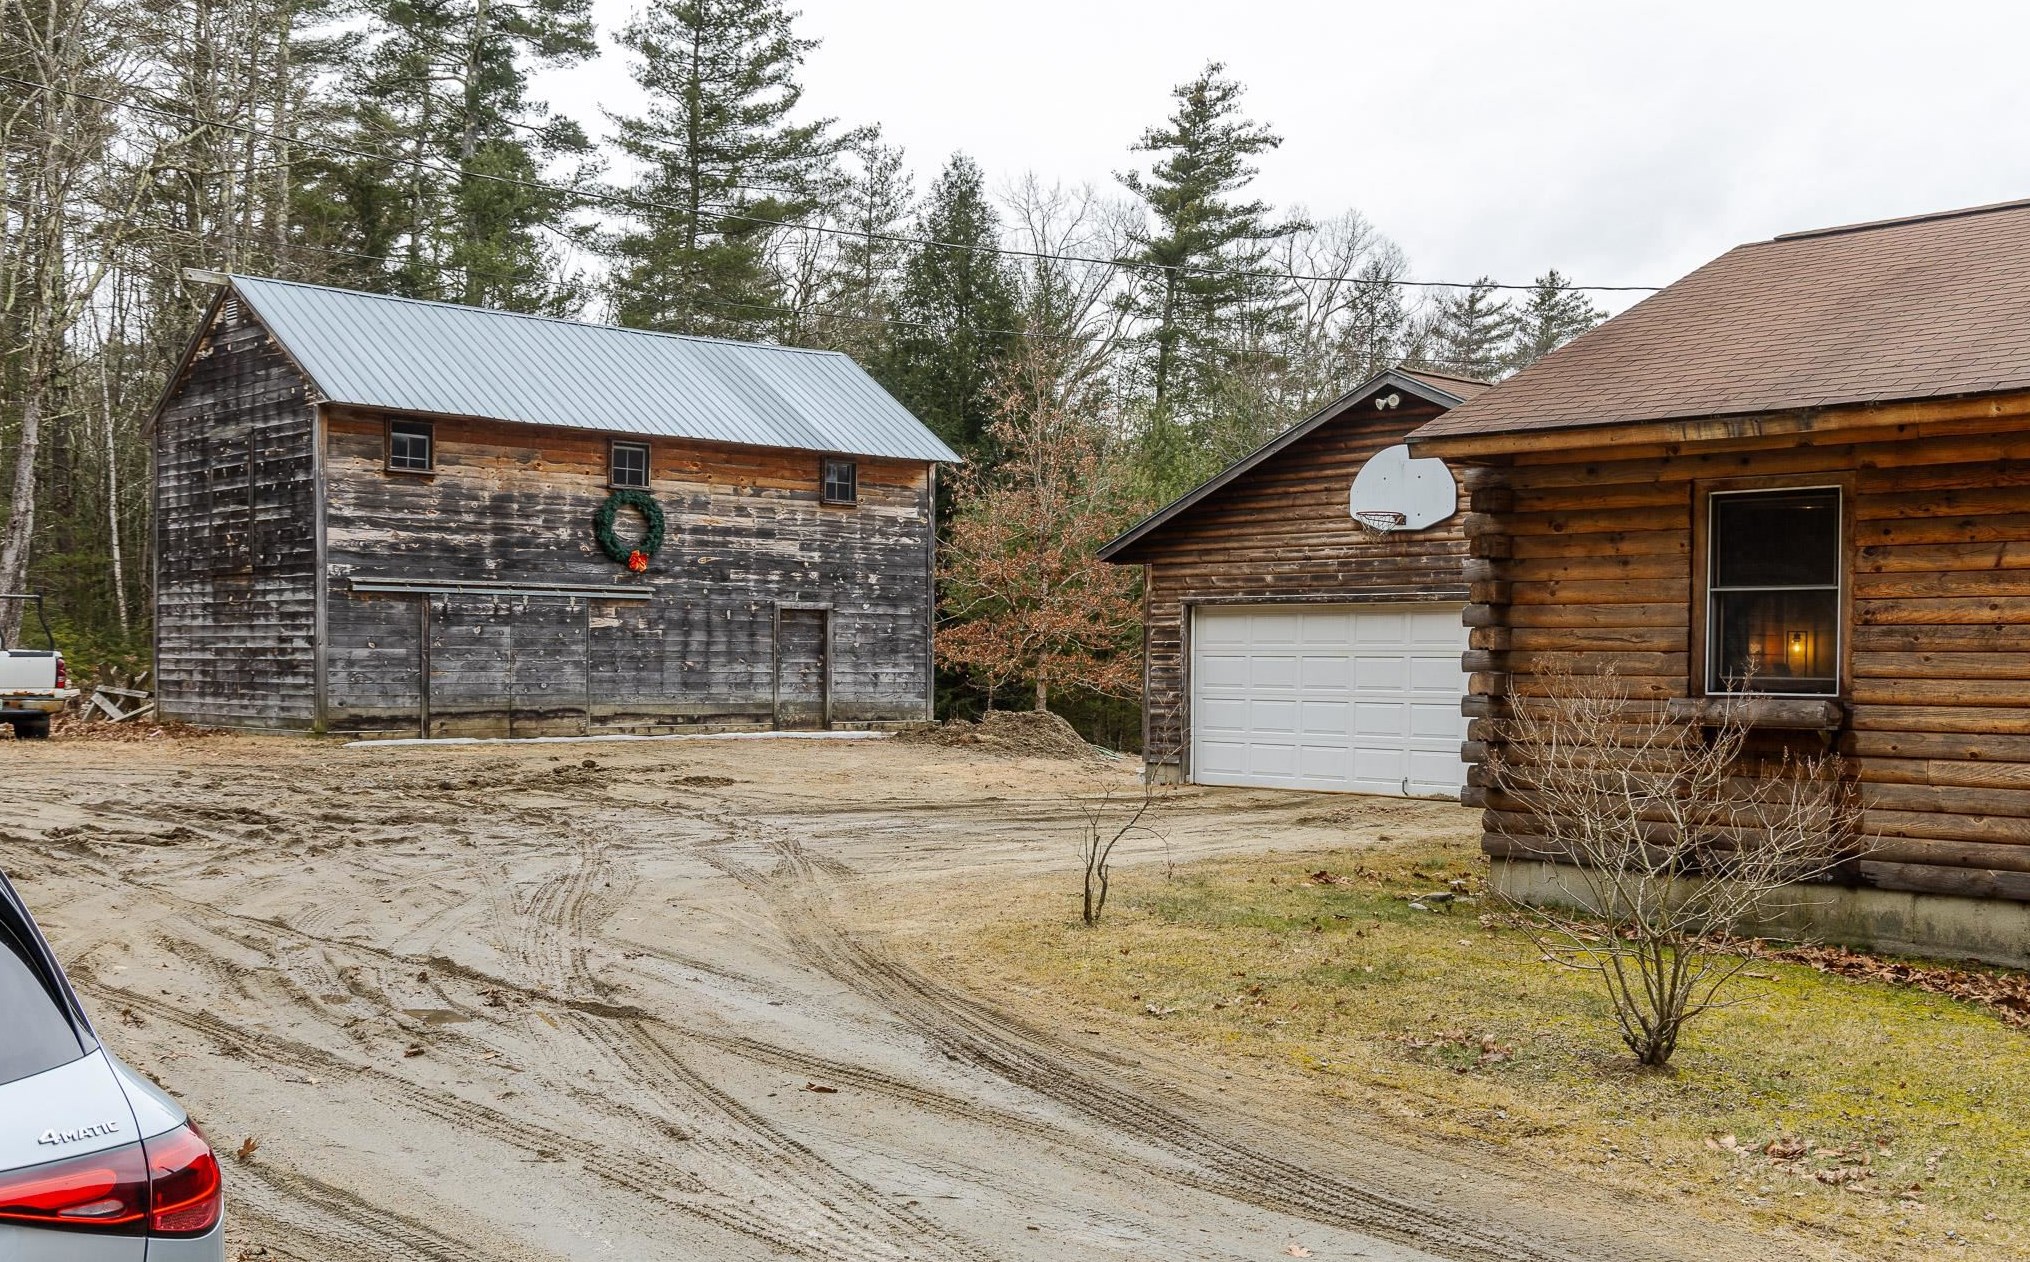 51 Stone Mountain Rd, Winchester, NH 03470